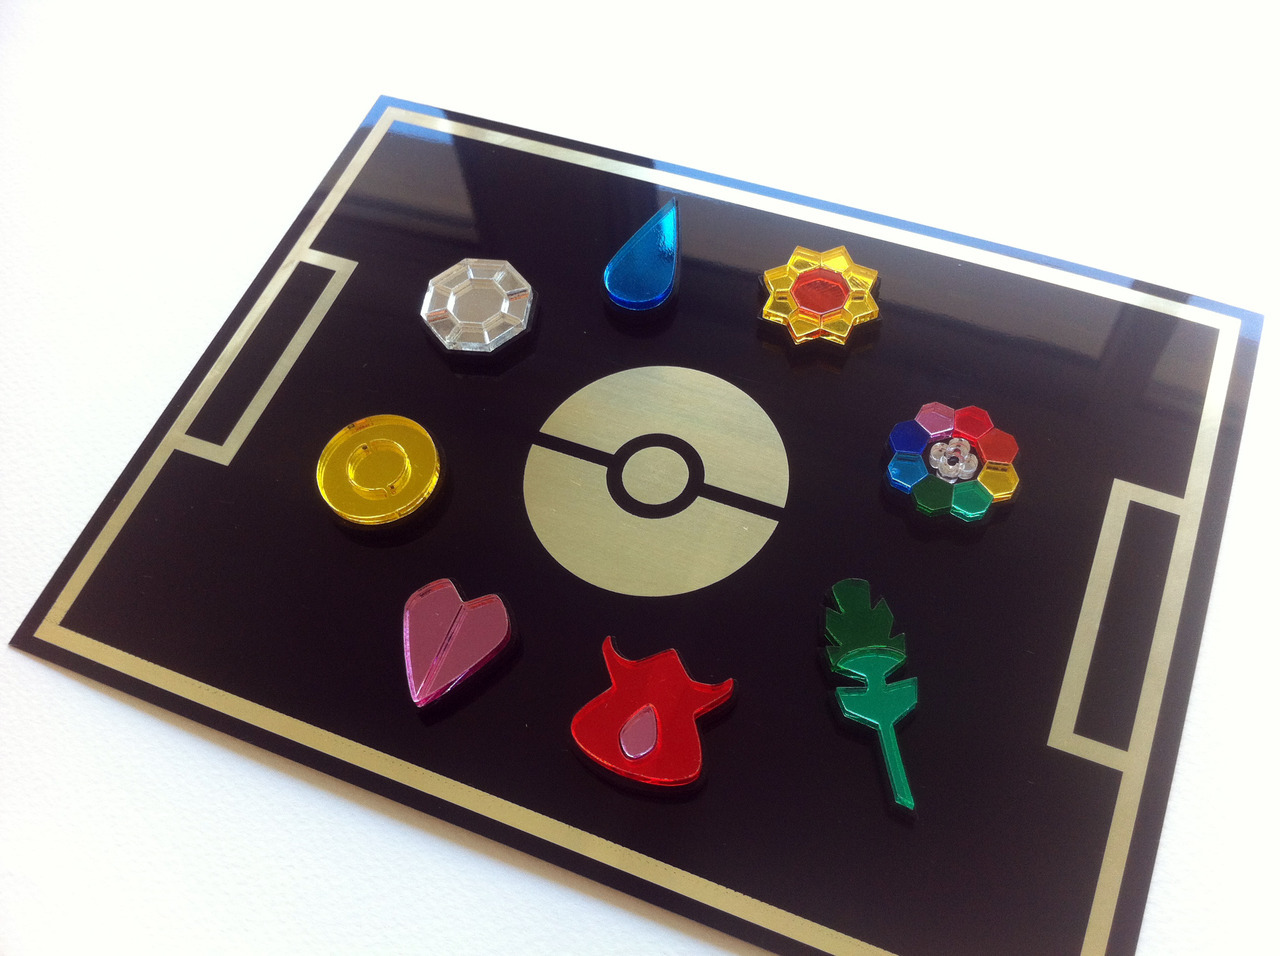 blazerdesigns:  October Giveaway: Pokemon Gym Badges It’s been a while since I’ve